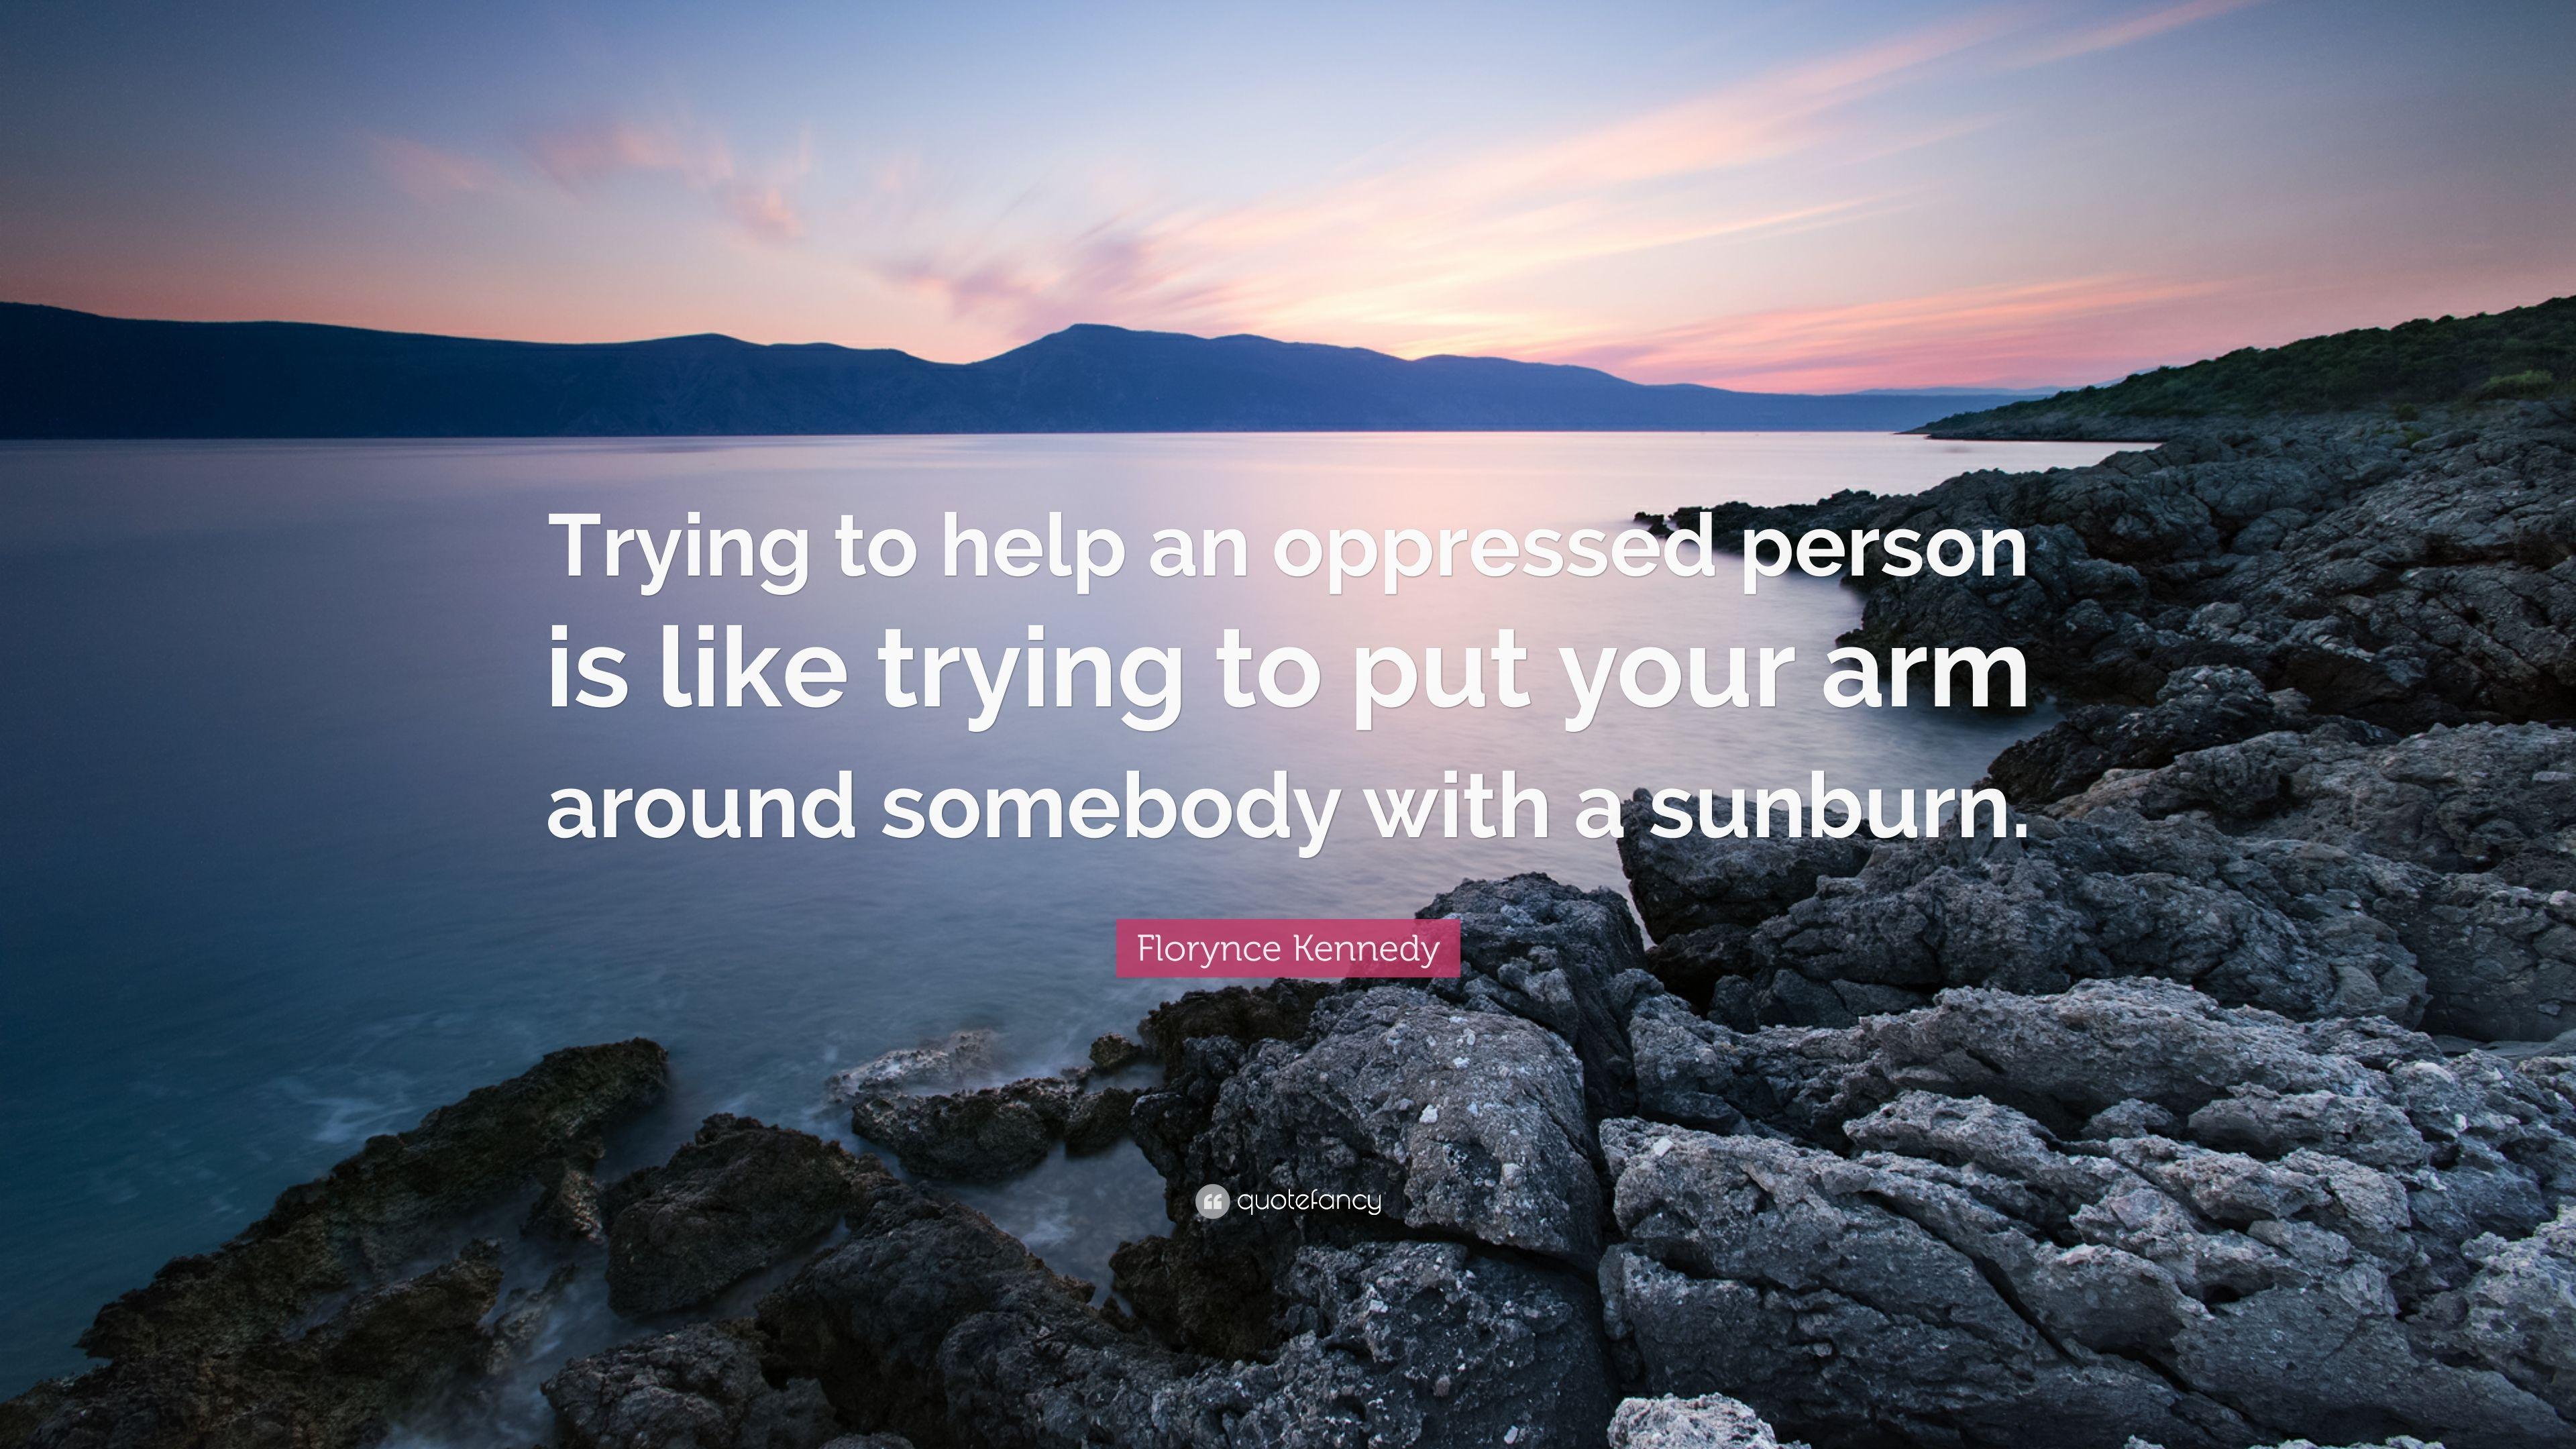 Florynce Kennedy Quote: “Trying to help an oppressed person is like